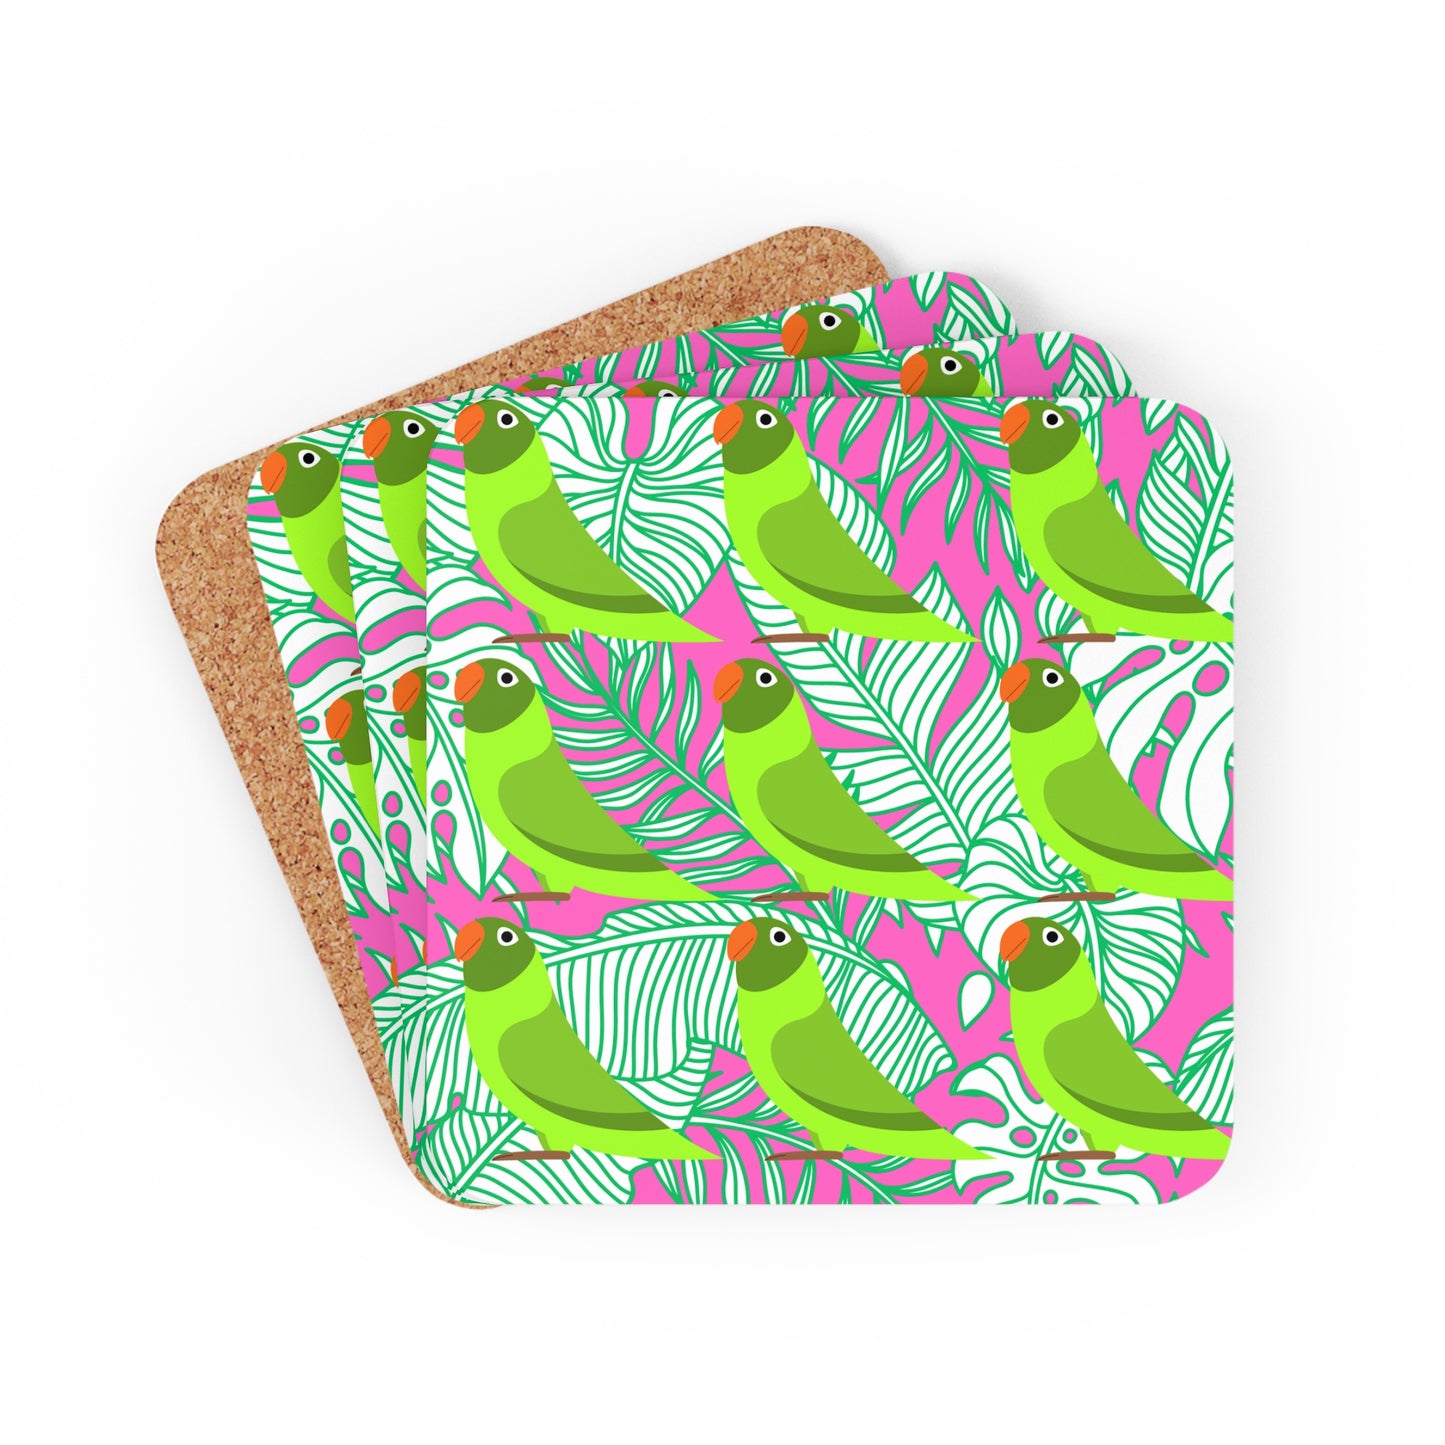 Parrots of Palm Beach Tropical Hot Pink Cocktail Party Beverages  Entertaining Corkwood Coaster Set